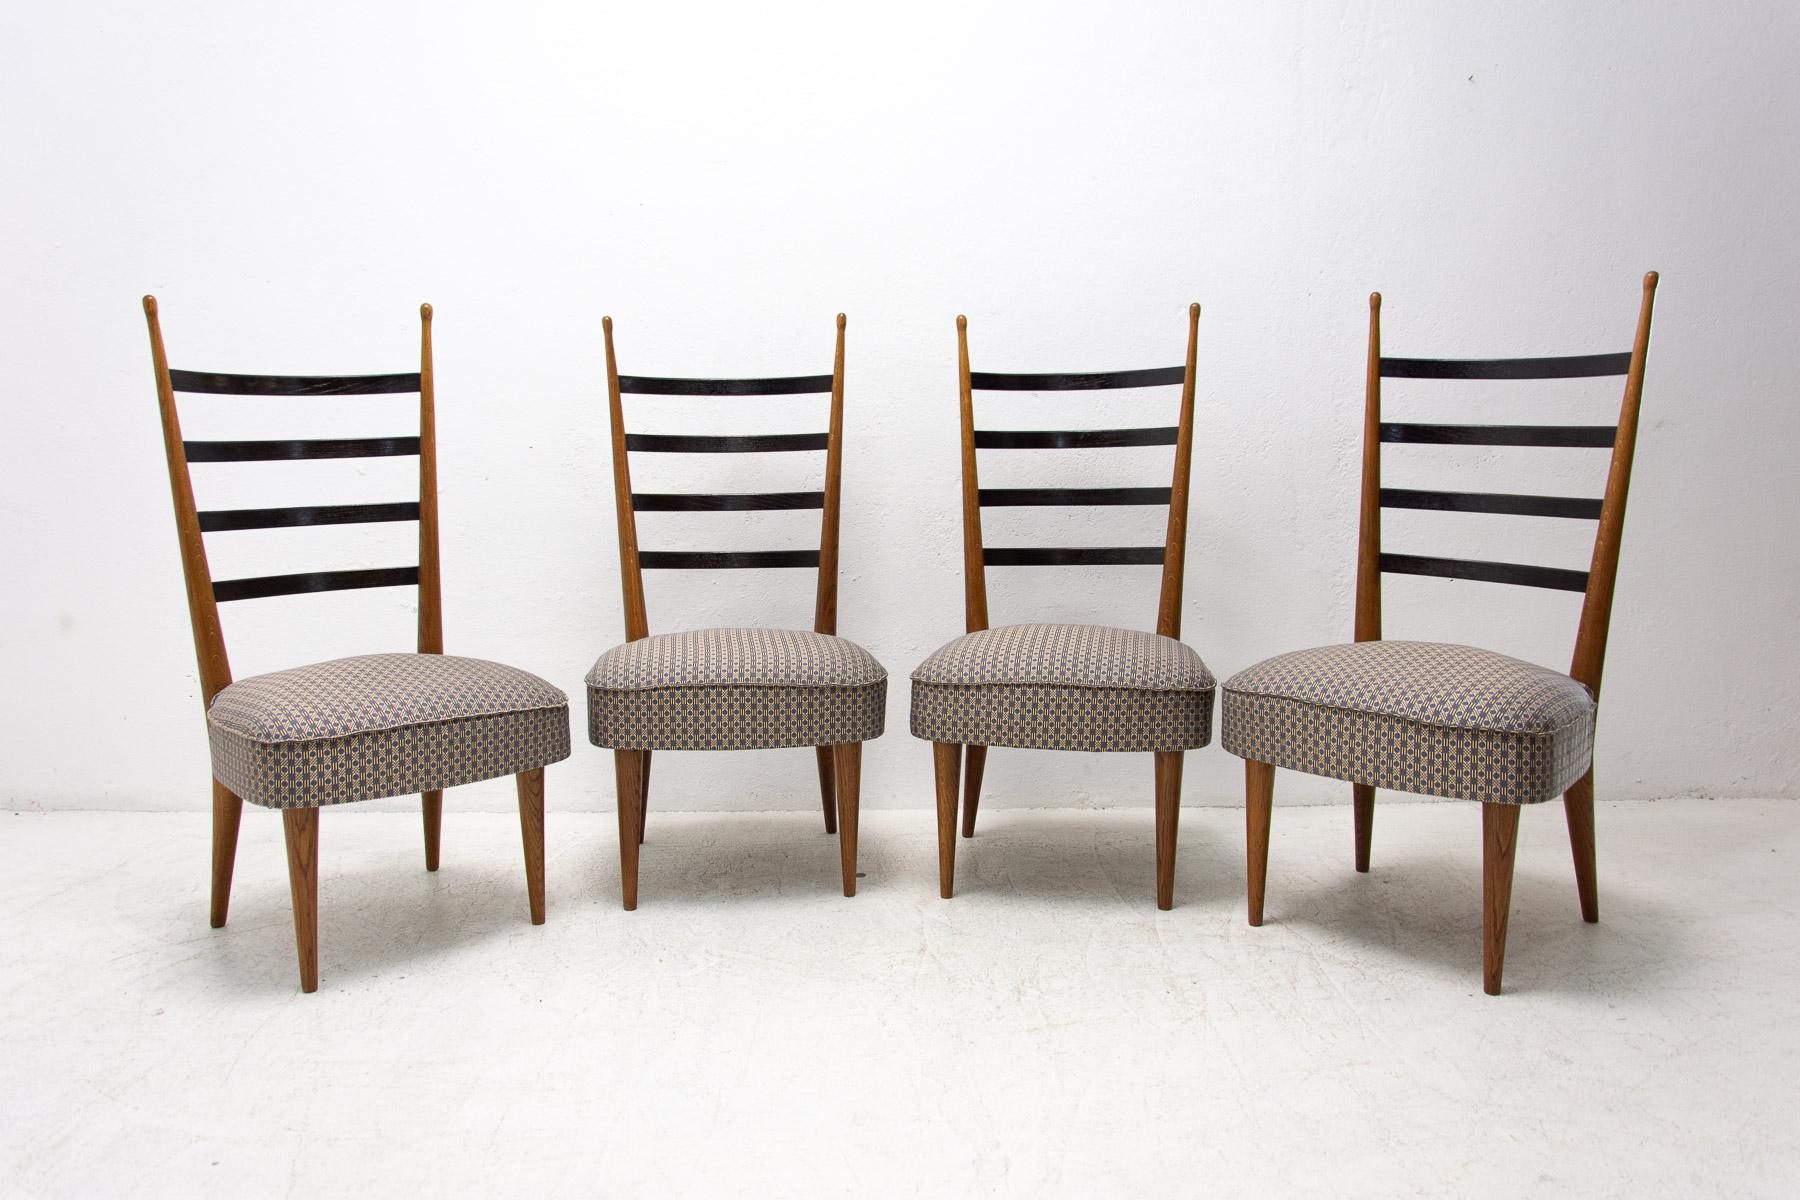 Set of four dining chairs designed by Czechoslovak architect Josef Pehr. Made to order for functionalist villa in Prague in the 1940s.
Beech wood, fabric.
The chairs were obviously renovated in the past and remain in very good condition. Price is